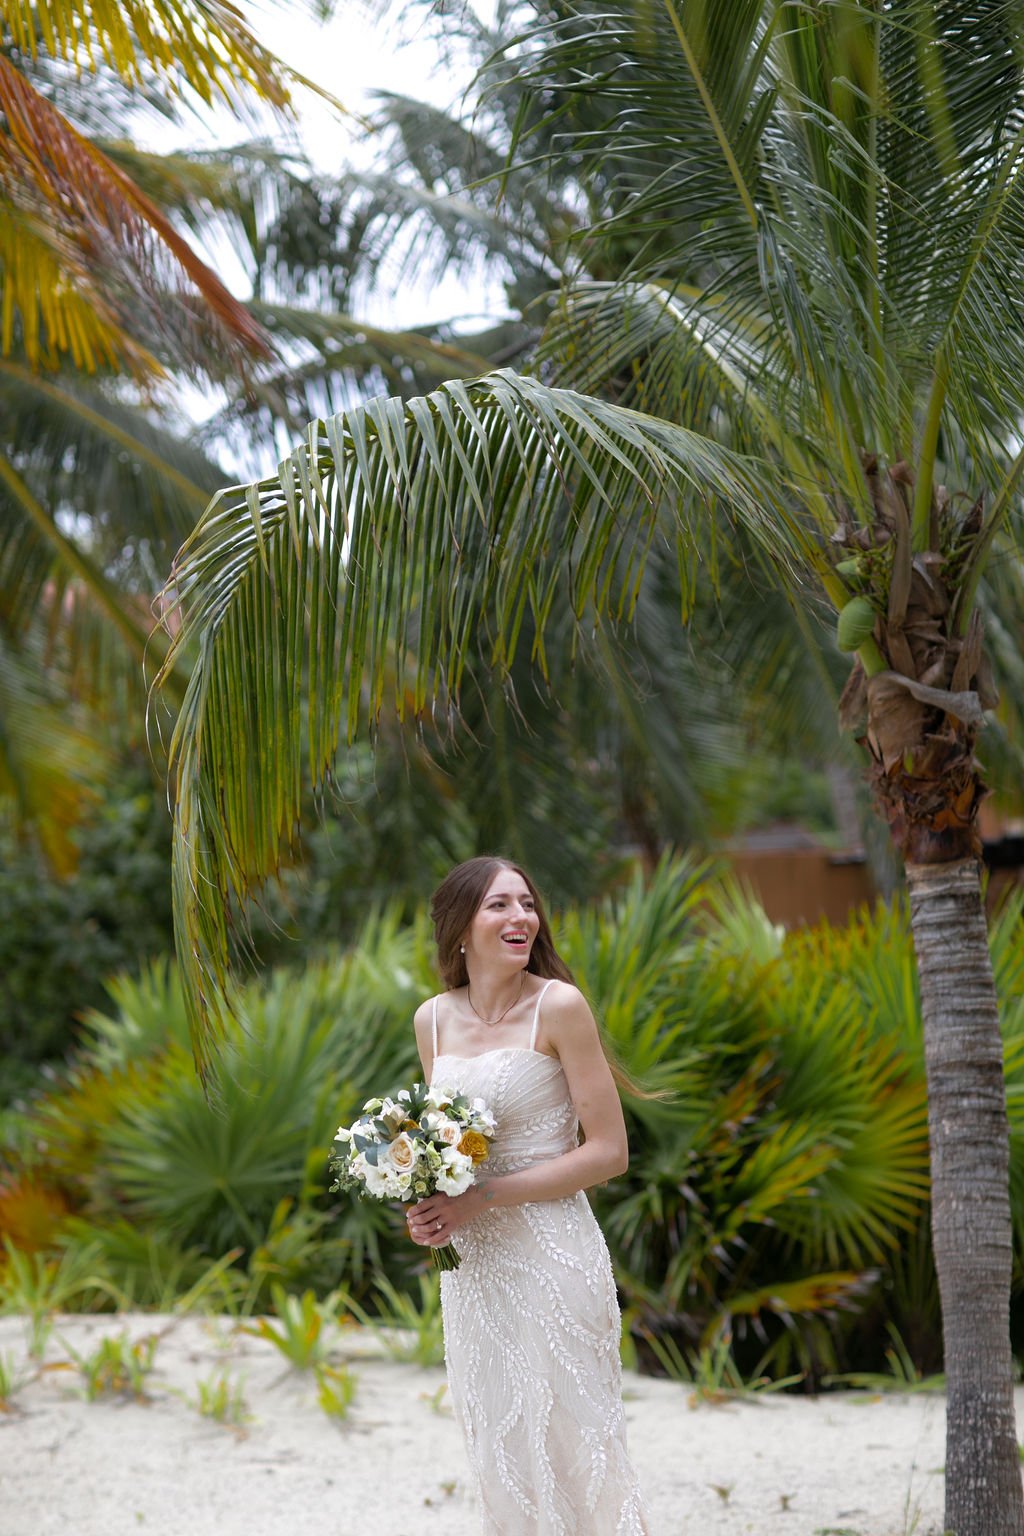 beautiful bride in classic and romantic gown for her destination wedding in mexico!